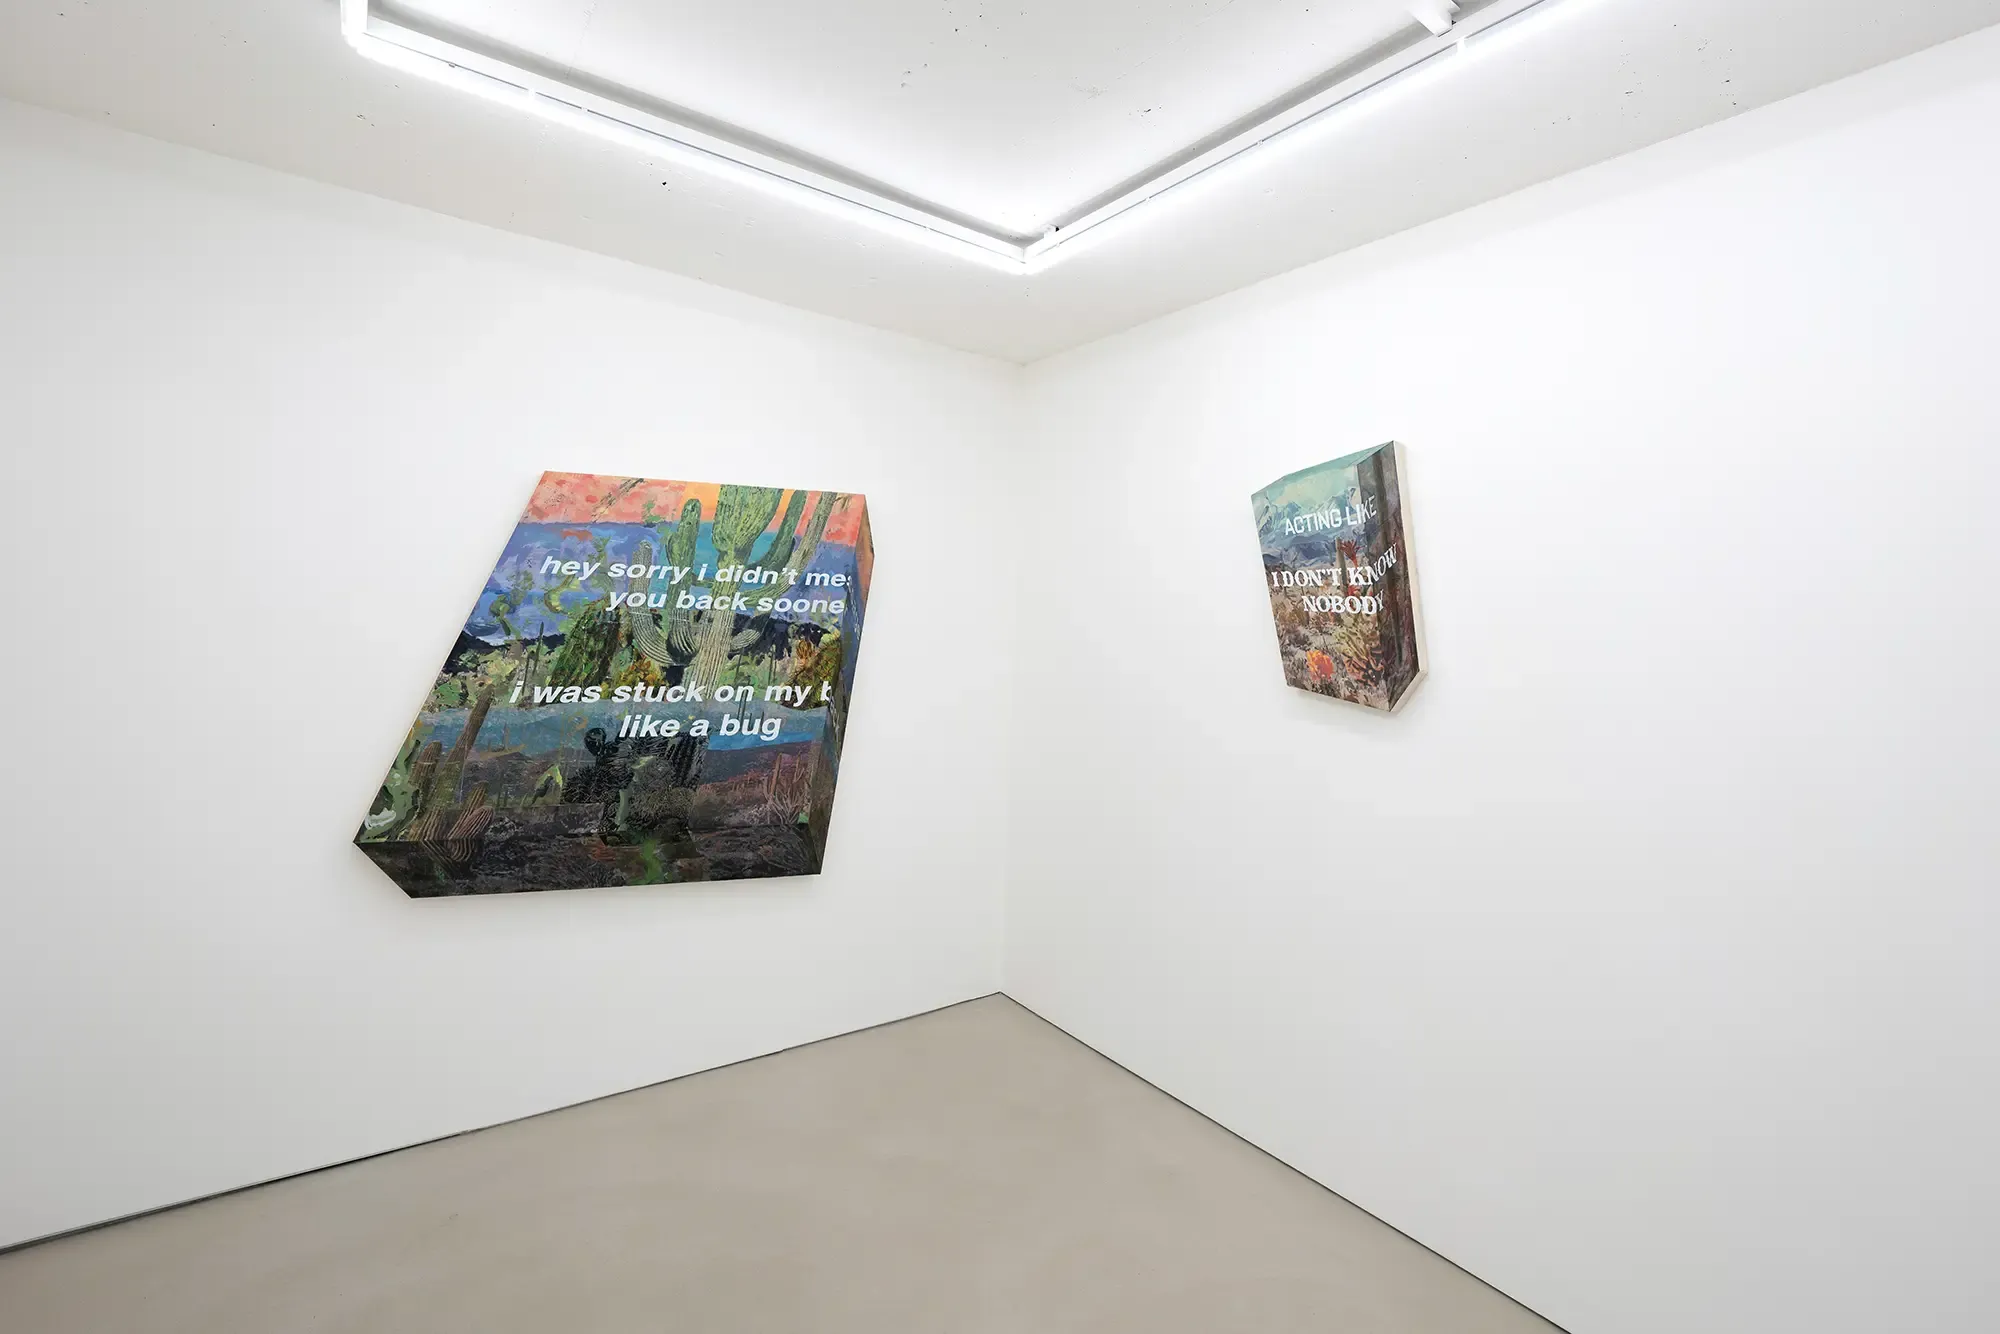 installation view of ho's exhibition at sangheeut gallery featuring text-based mixed media artworks inspired by environmental psychology and cultural identity